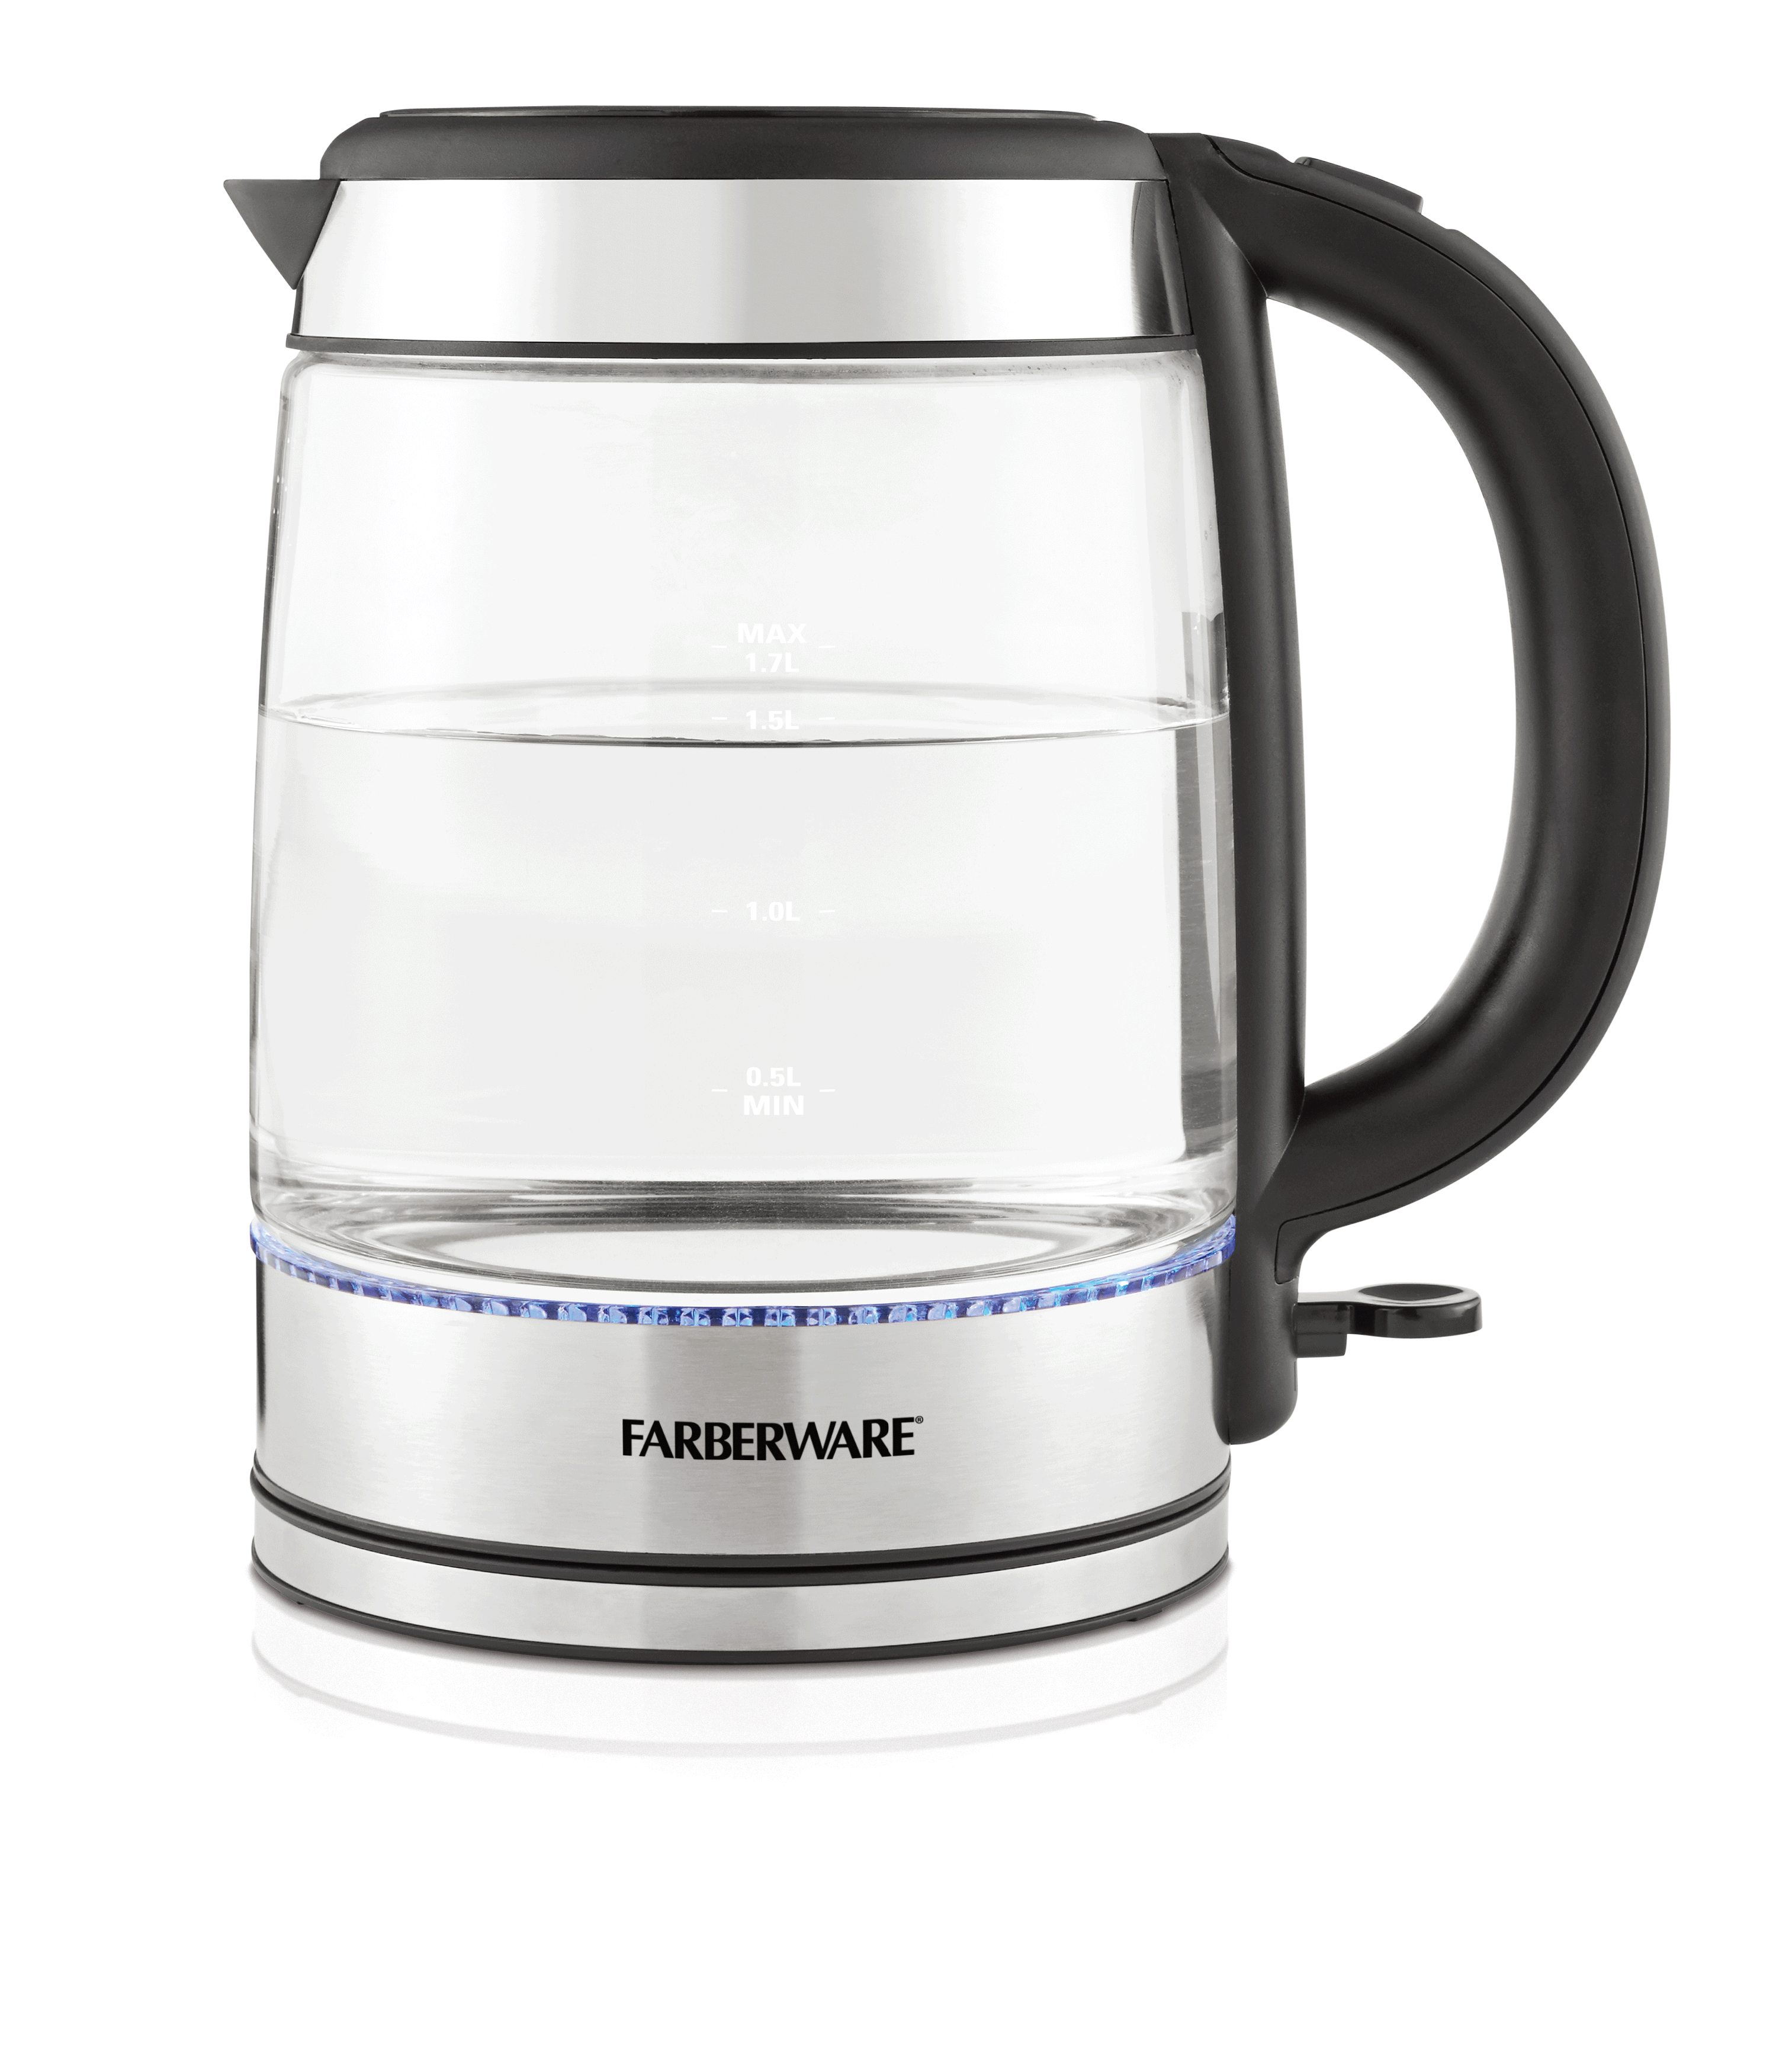 Farberware Royal Glass and Stainless Steel 1.7 Liter Electric Tea Kettle, Cordless - image 1 of 6